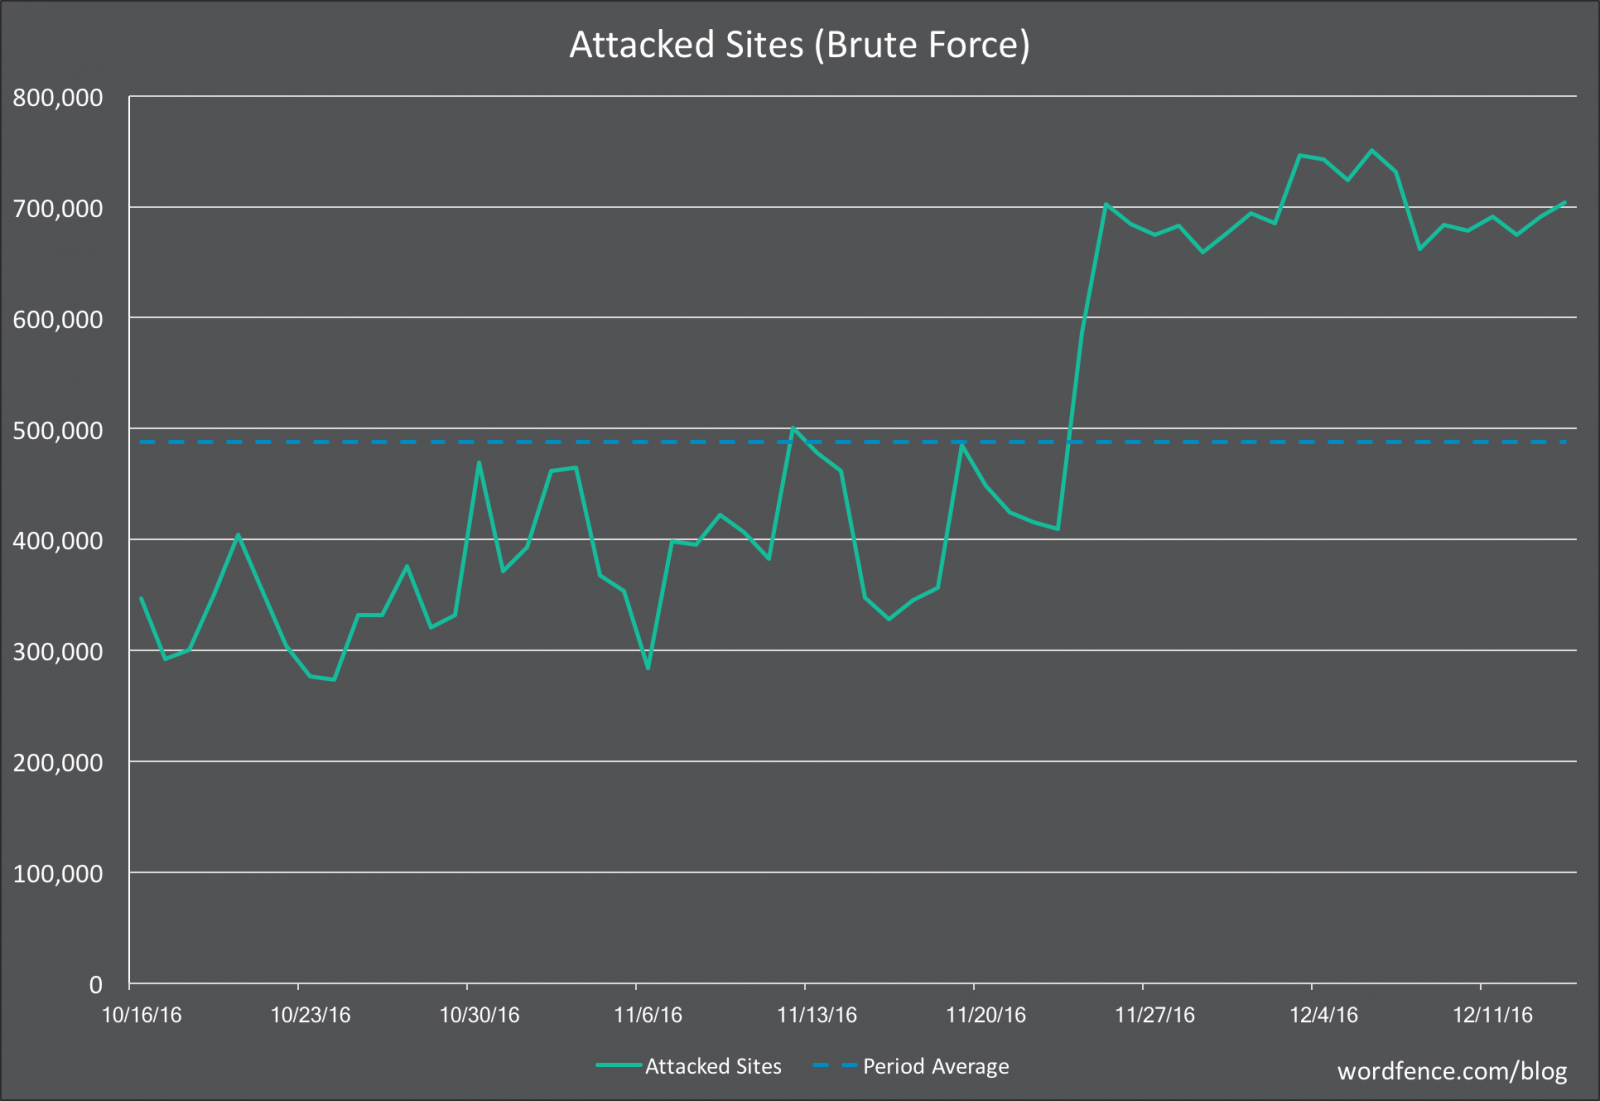 Number of attacked sites per day